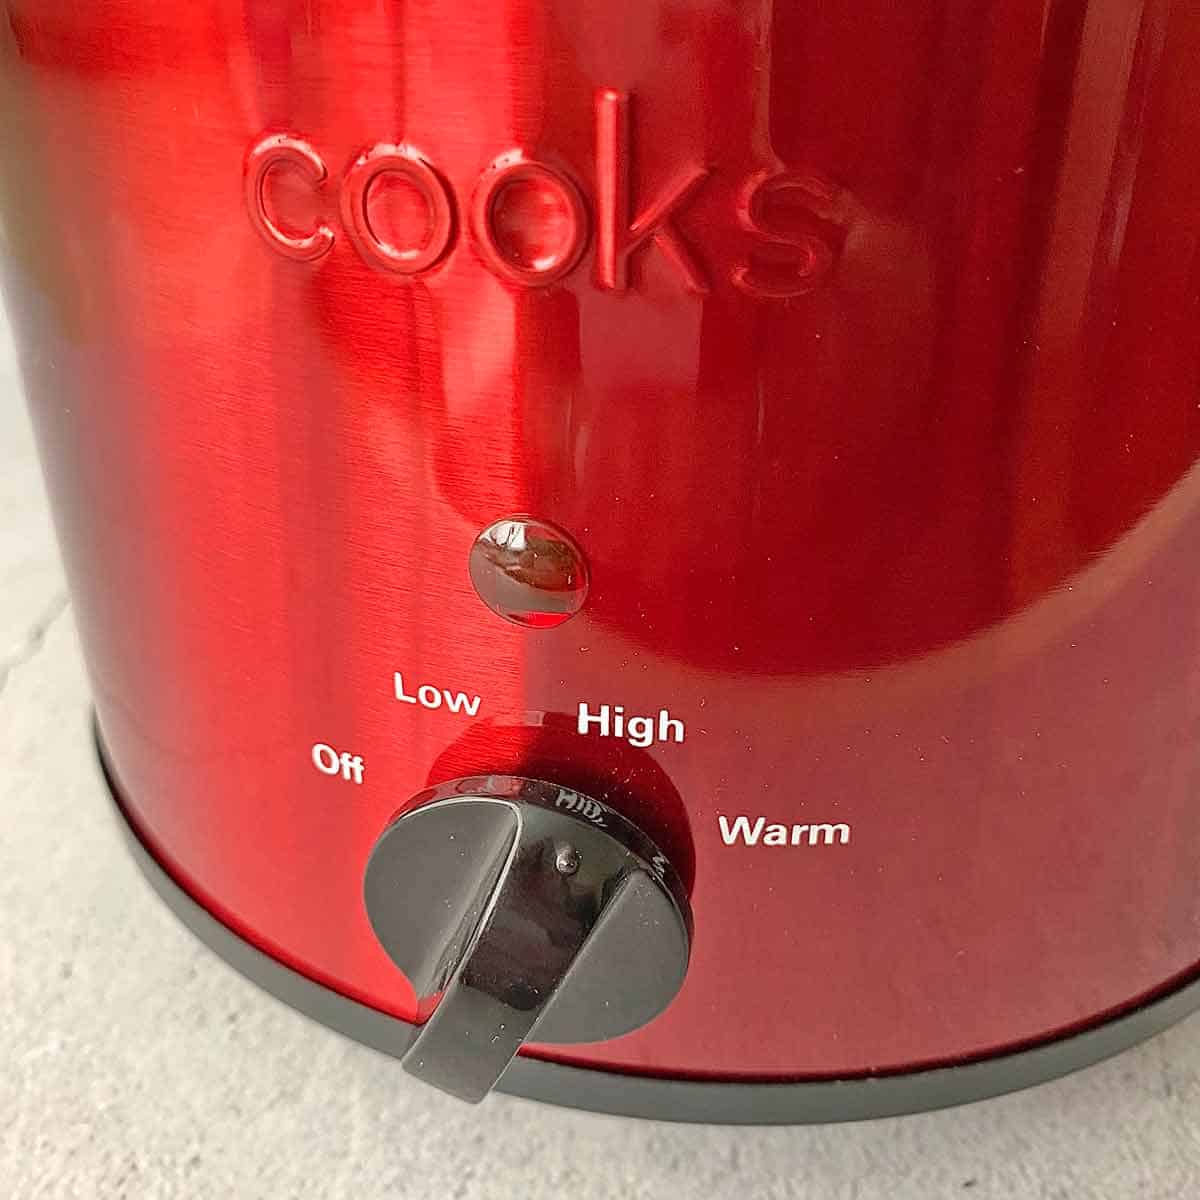 Setting the crock pot temperature to high.